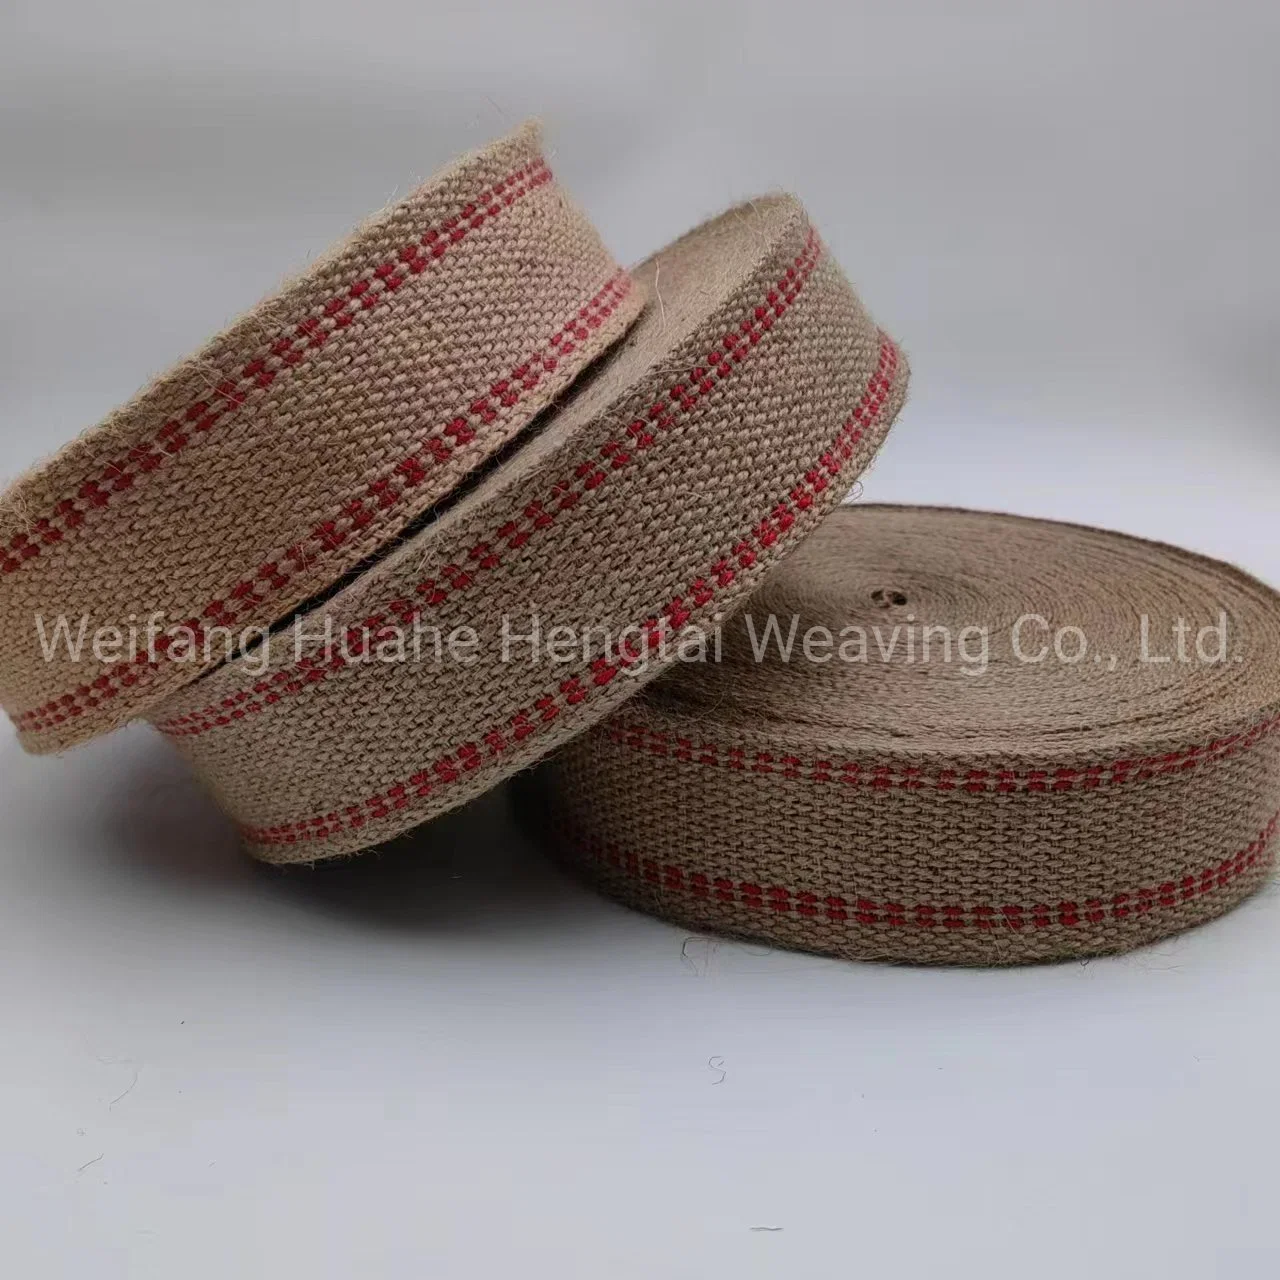 The Manufacturer Directly Sells Various Specifications of Jute Webbing Woven Hemp Rope